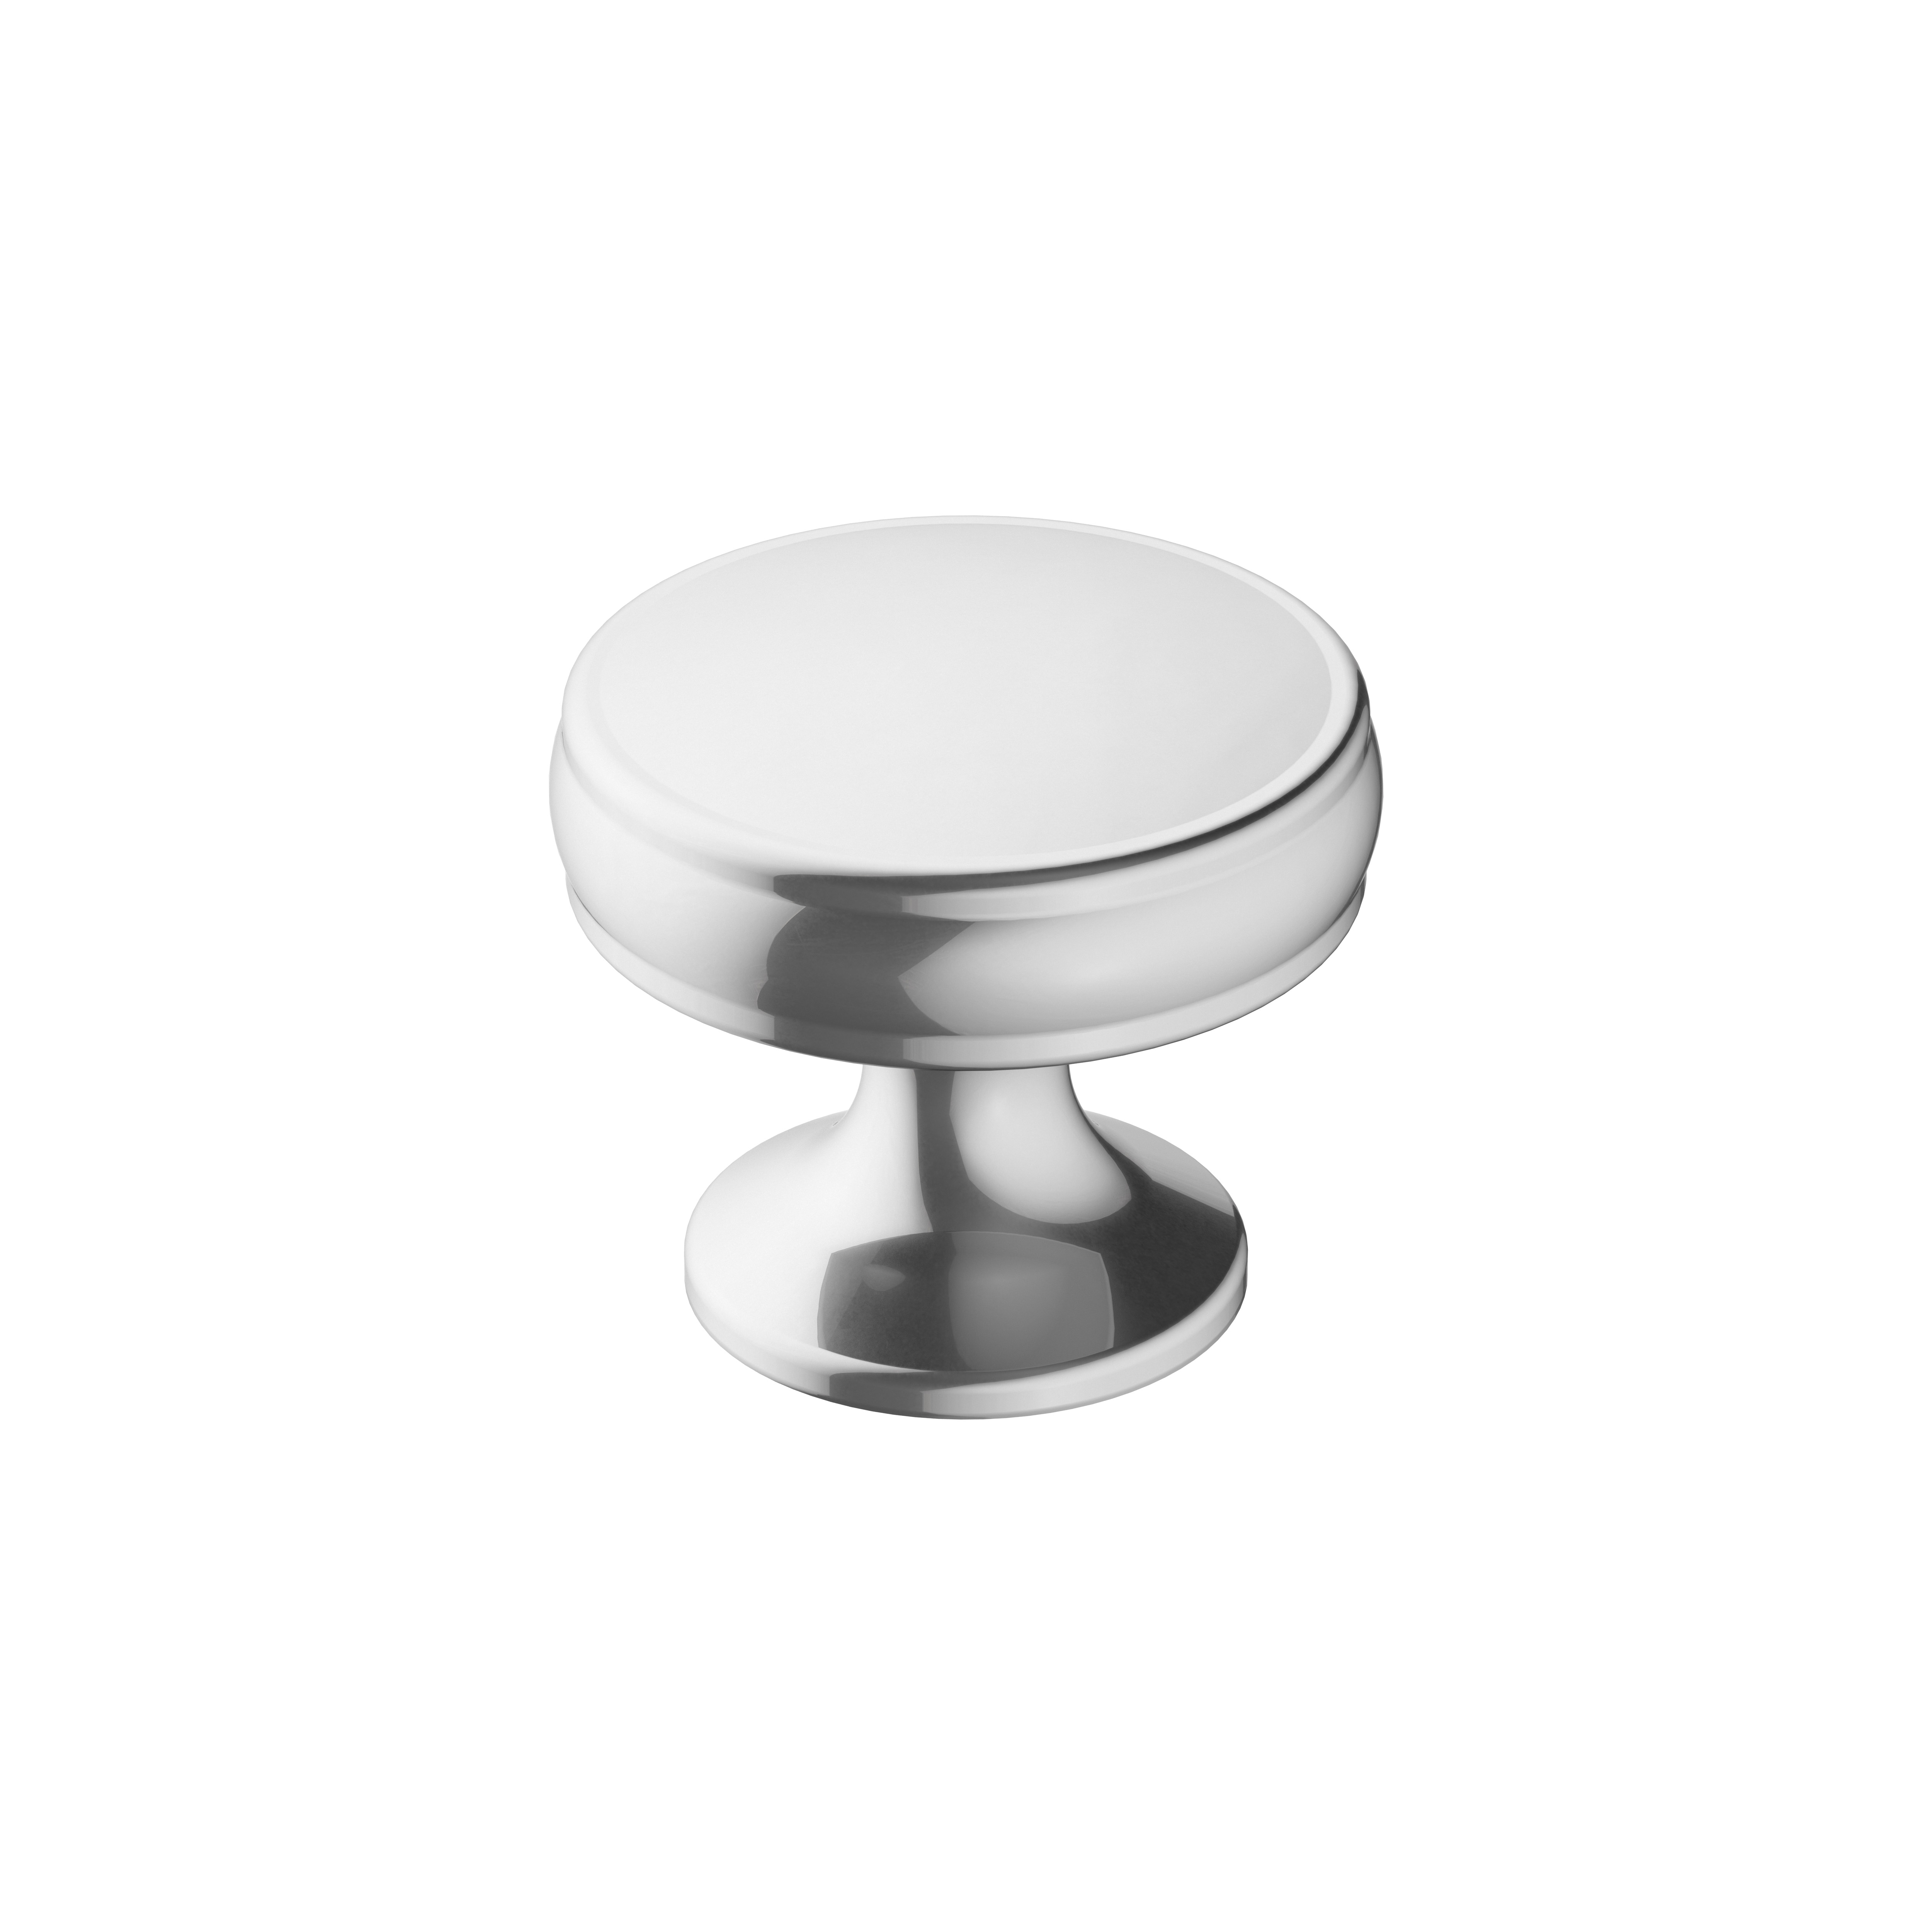 Allison by Amerock BP3679326 Renown 1-1/4 in (32 mm) Diameter Polished Chrome Cabinet Knob